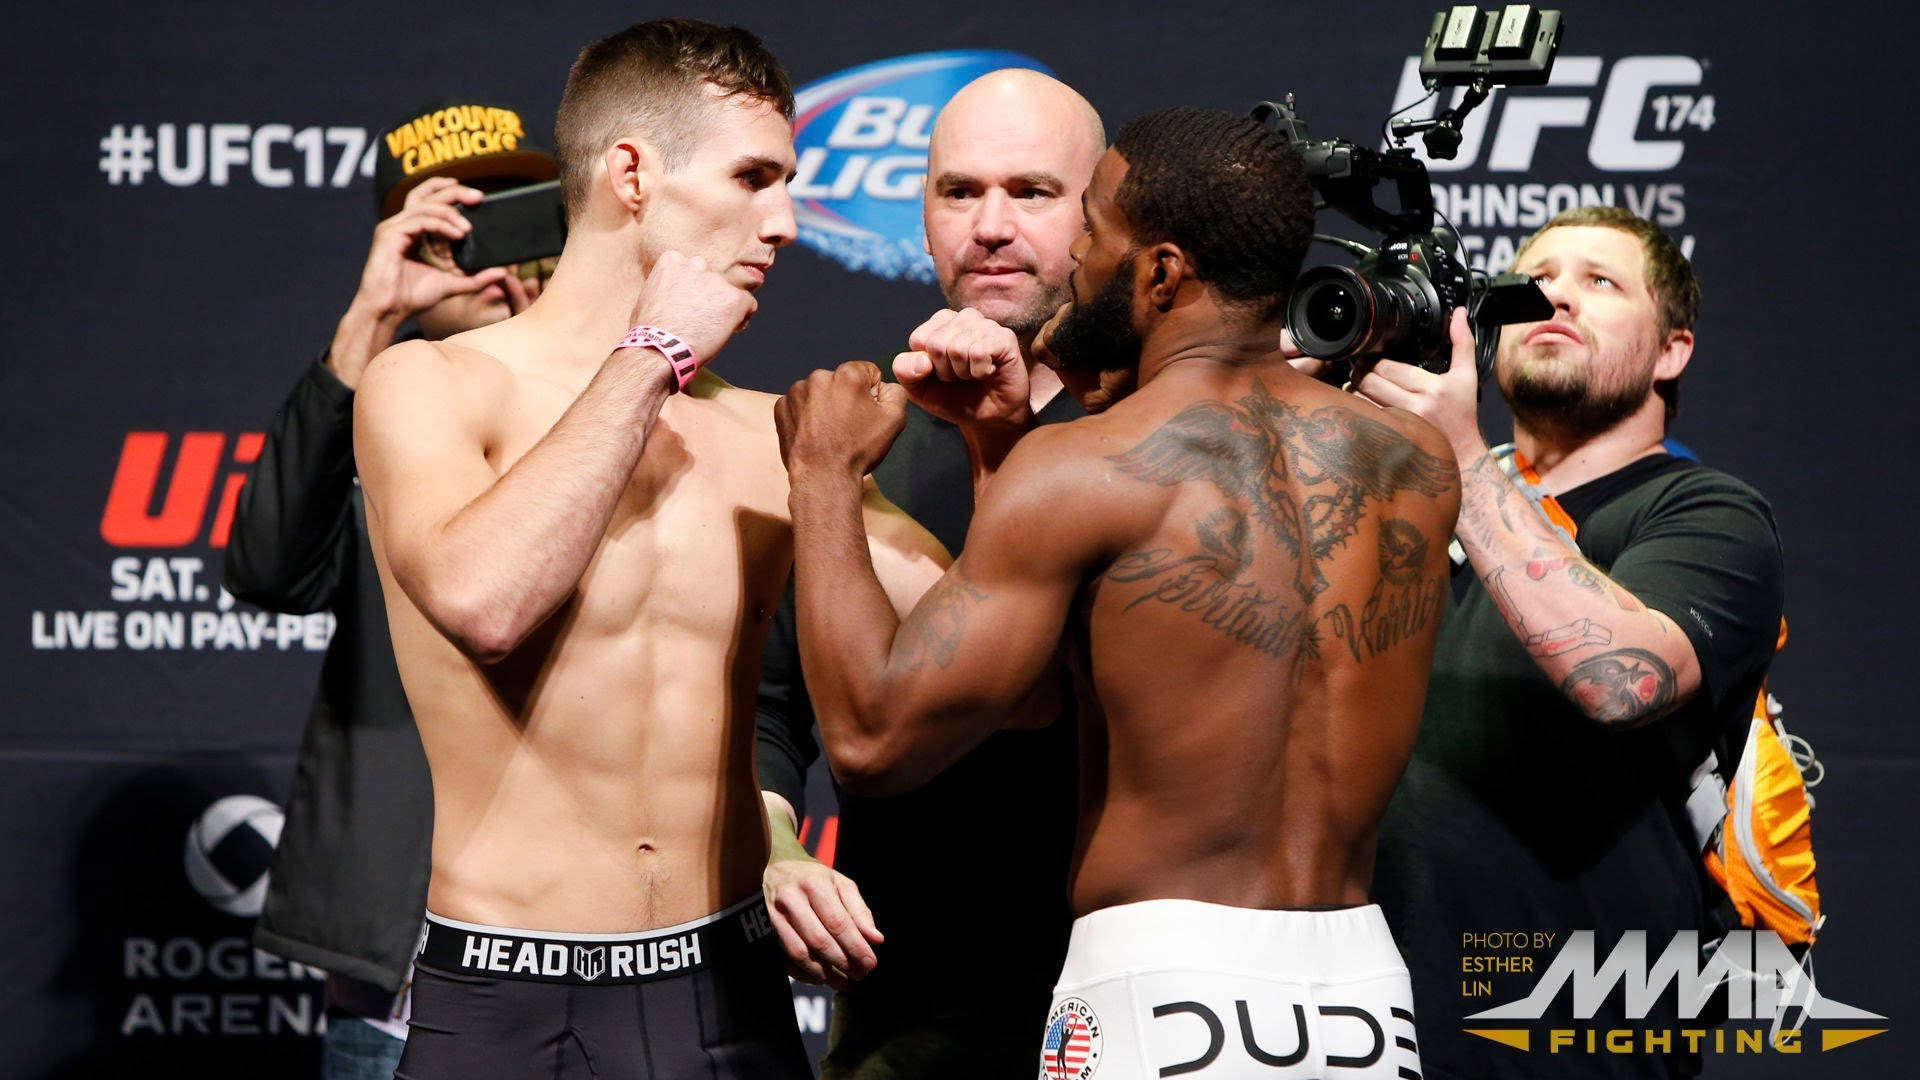 Tyron Woodley Against Rory Macdonald